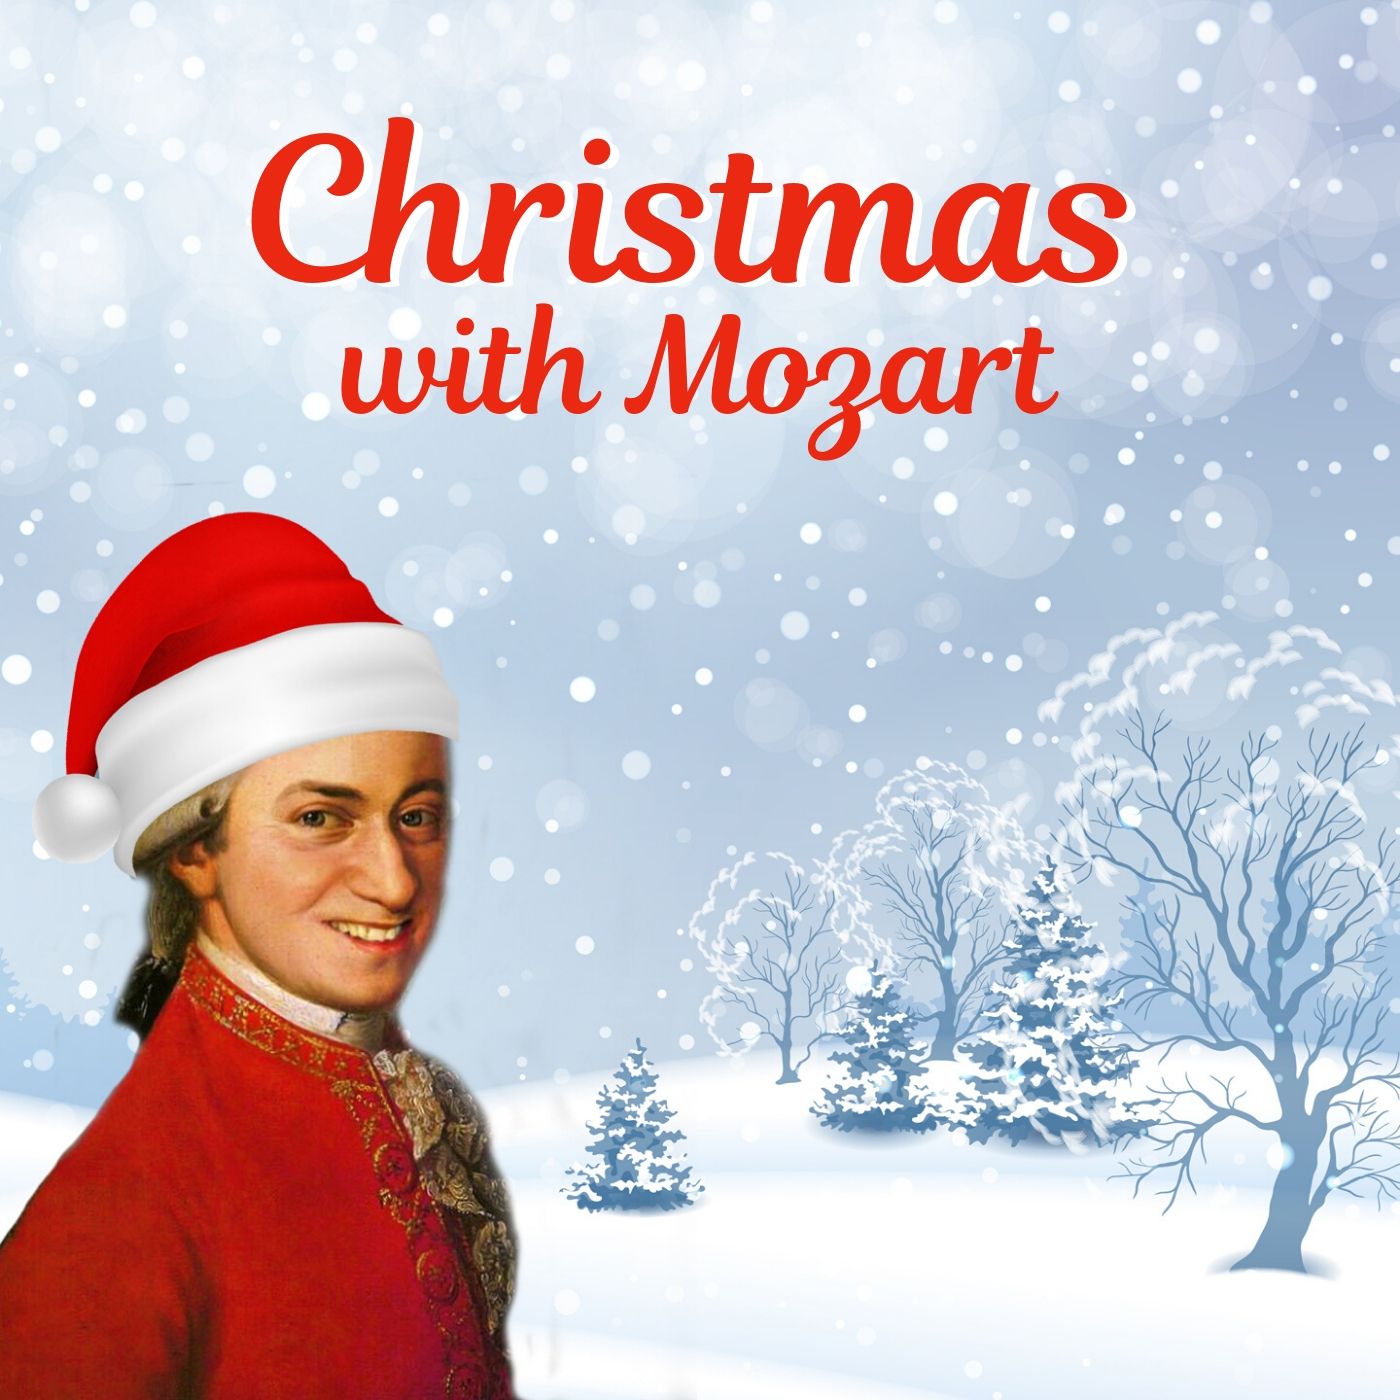 Christmas with Mozart